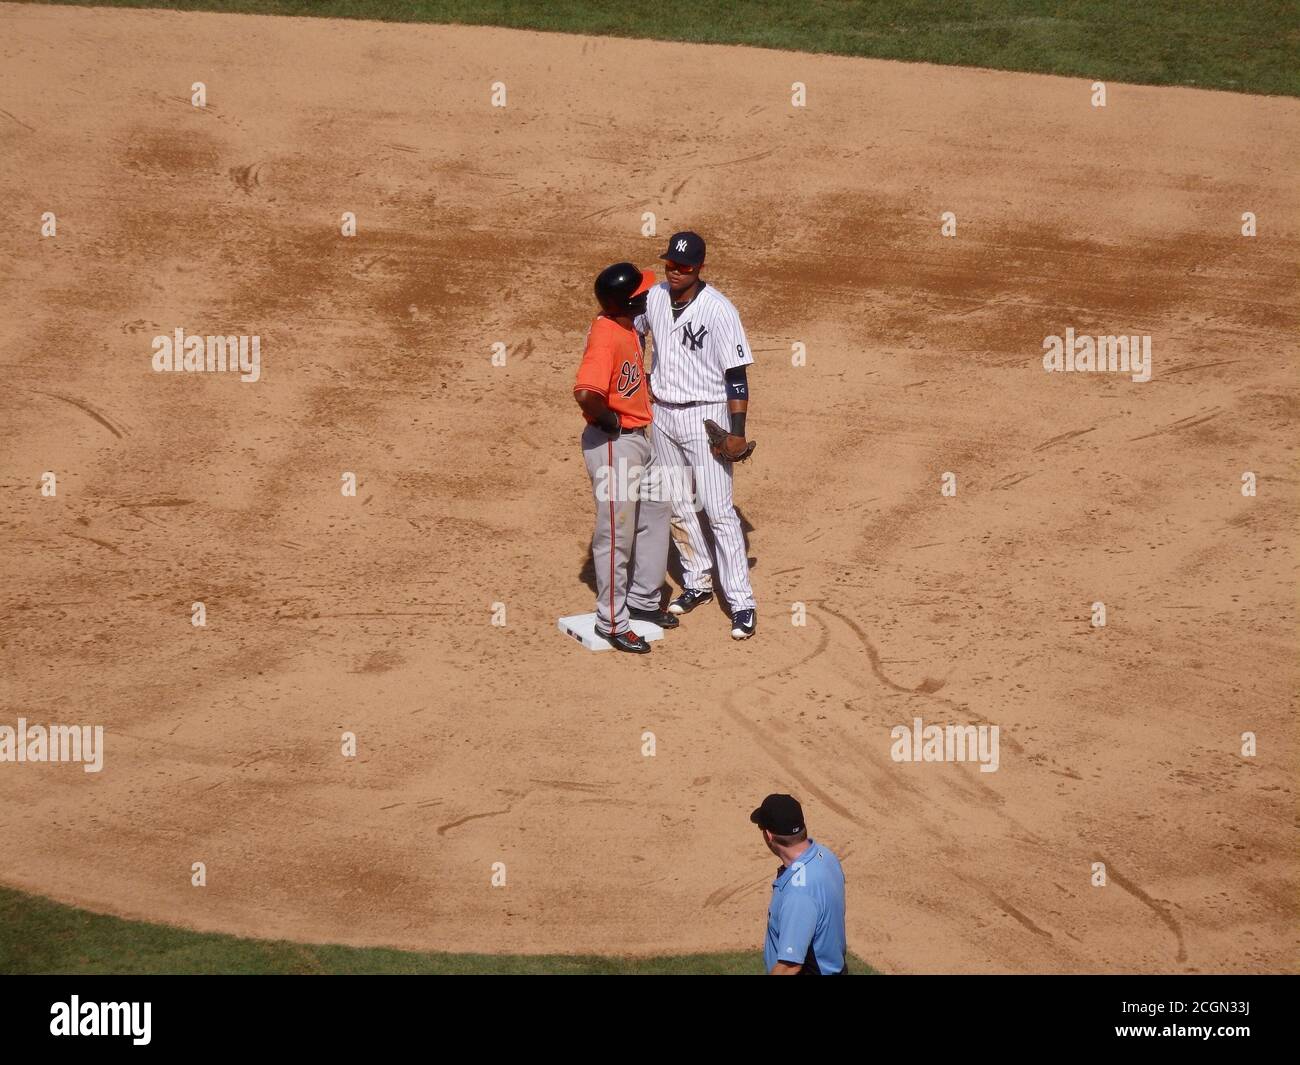 A baseball umpire watches 2nd base as two baseball players have a discussion, Yankee Stadium, New York City, United States Stock Photo